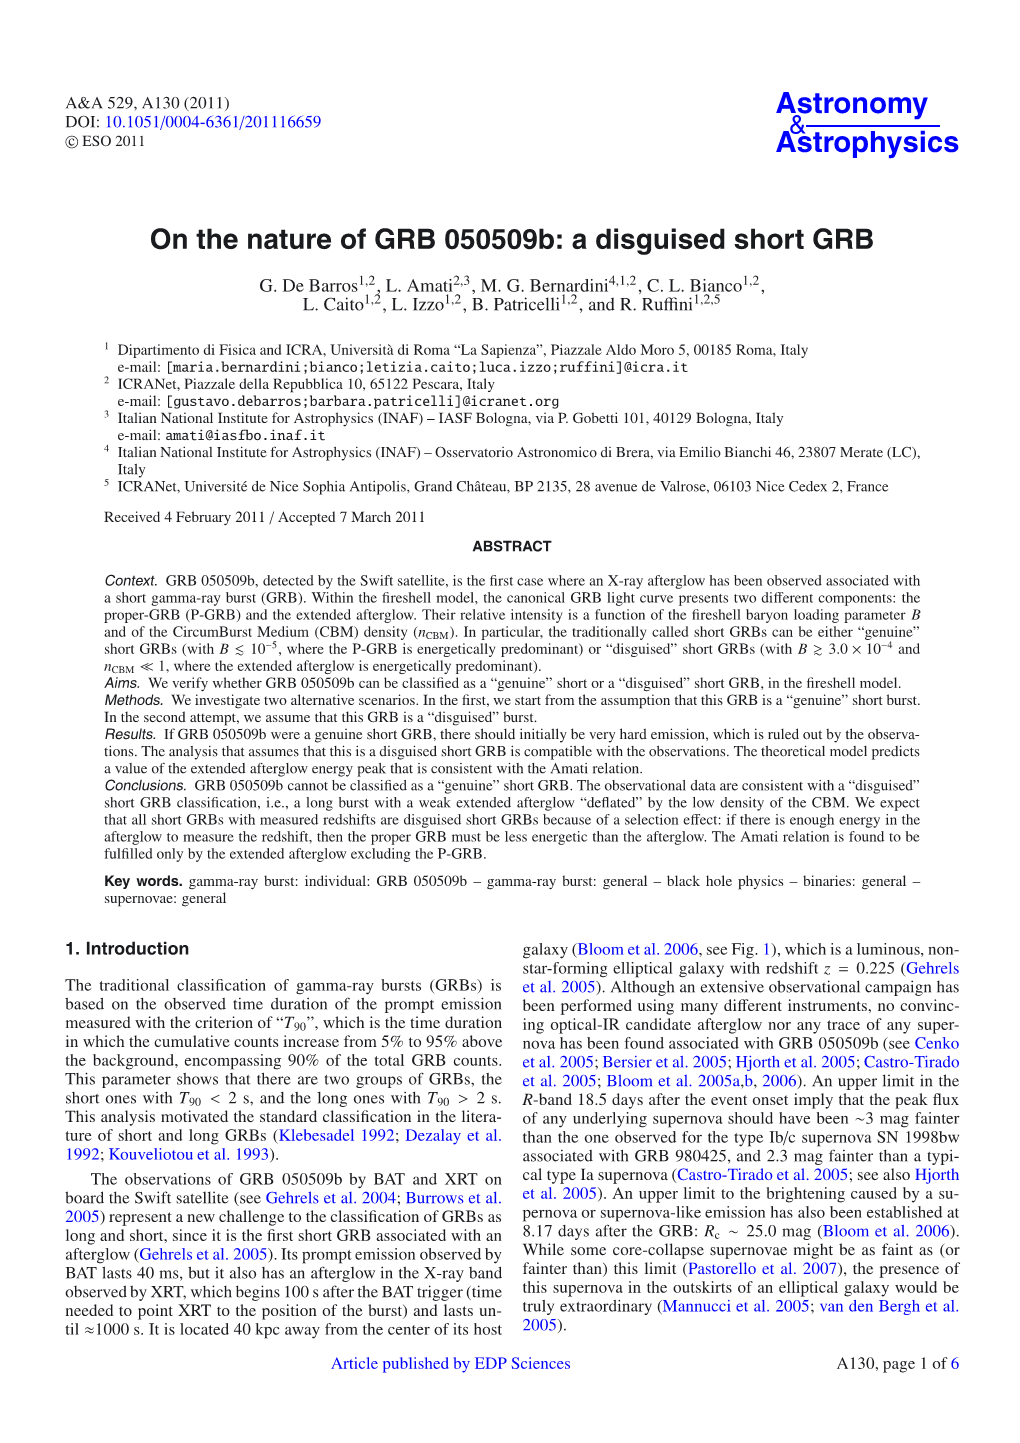 On the Nature of GRB 050509B: a Disguised Short GRB